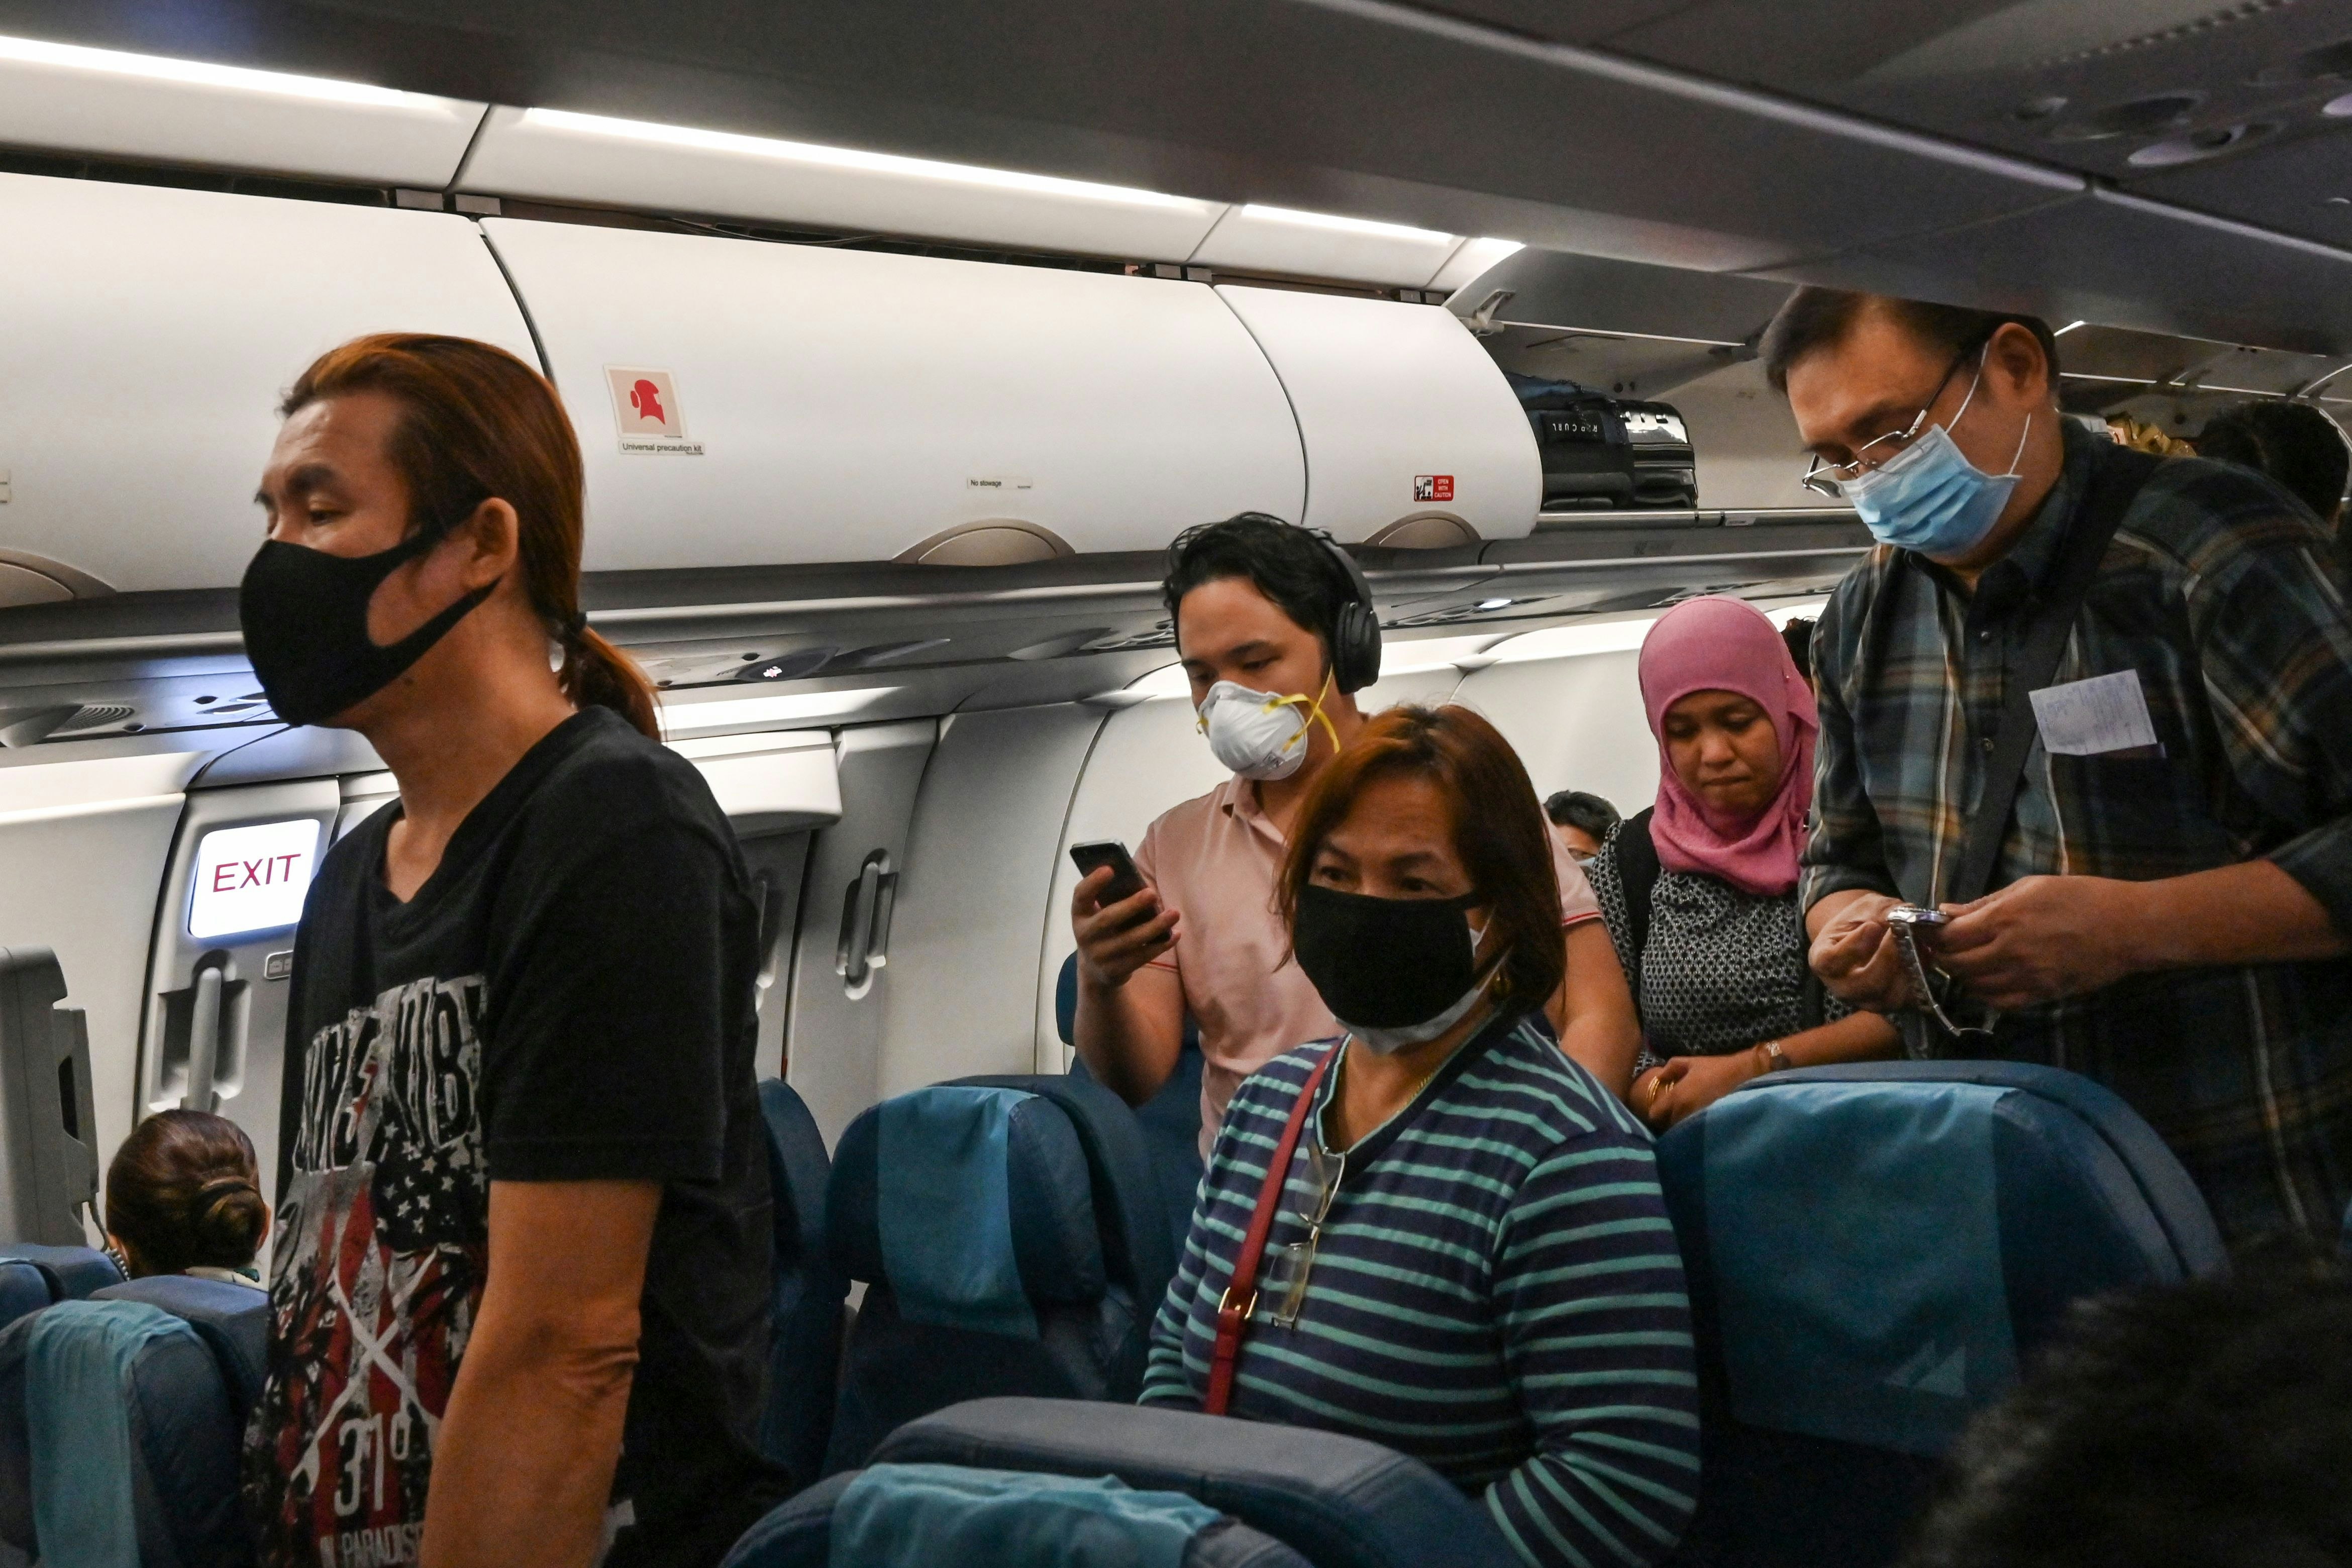 Passengers on a plane wearing facemasks